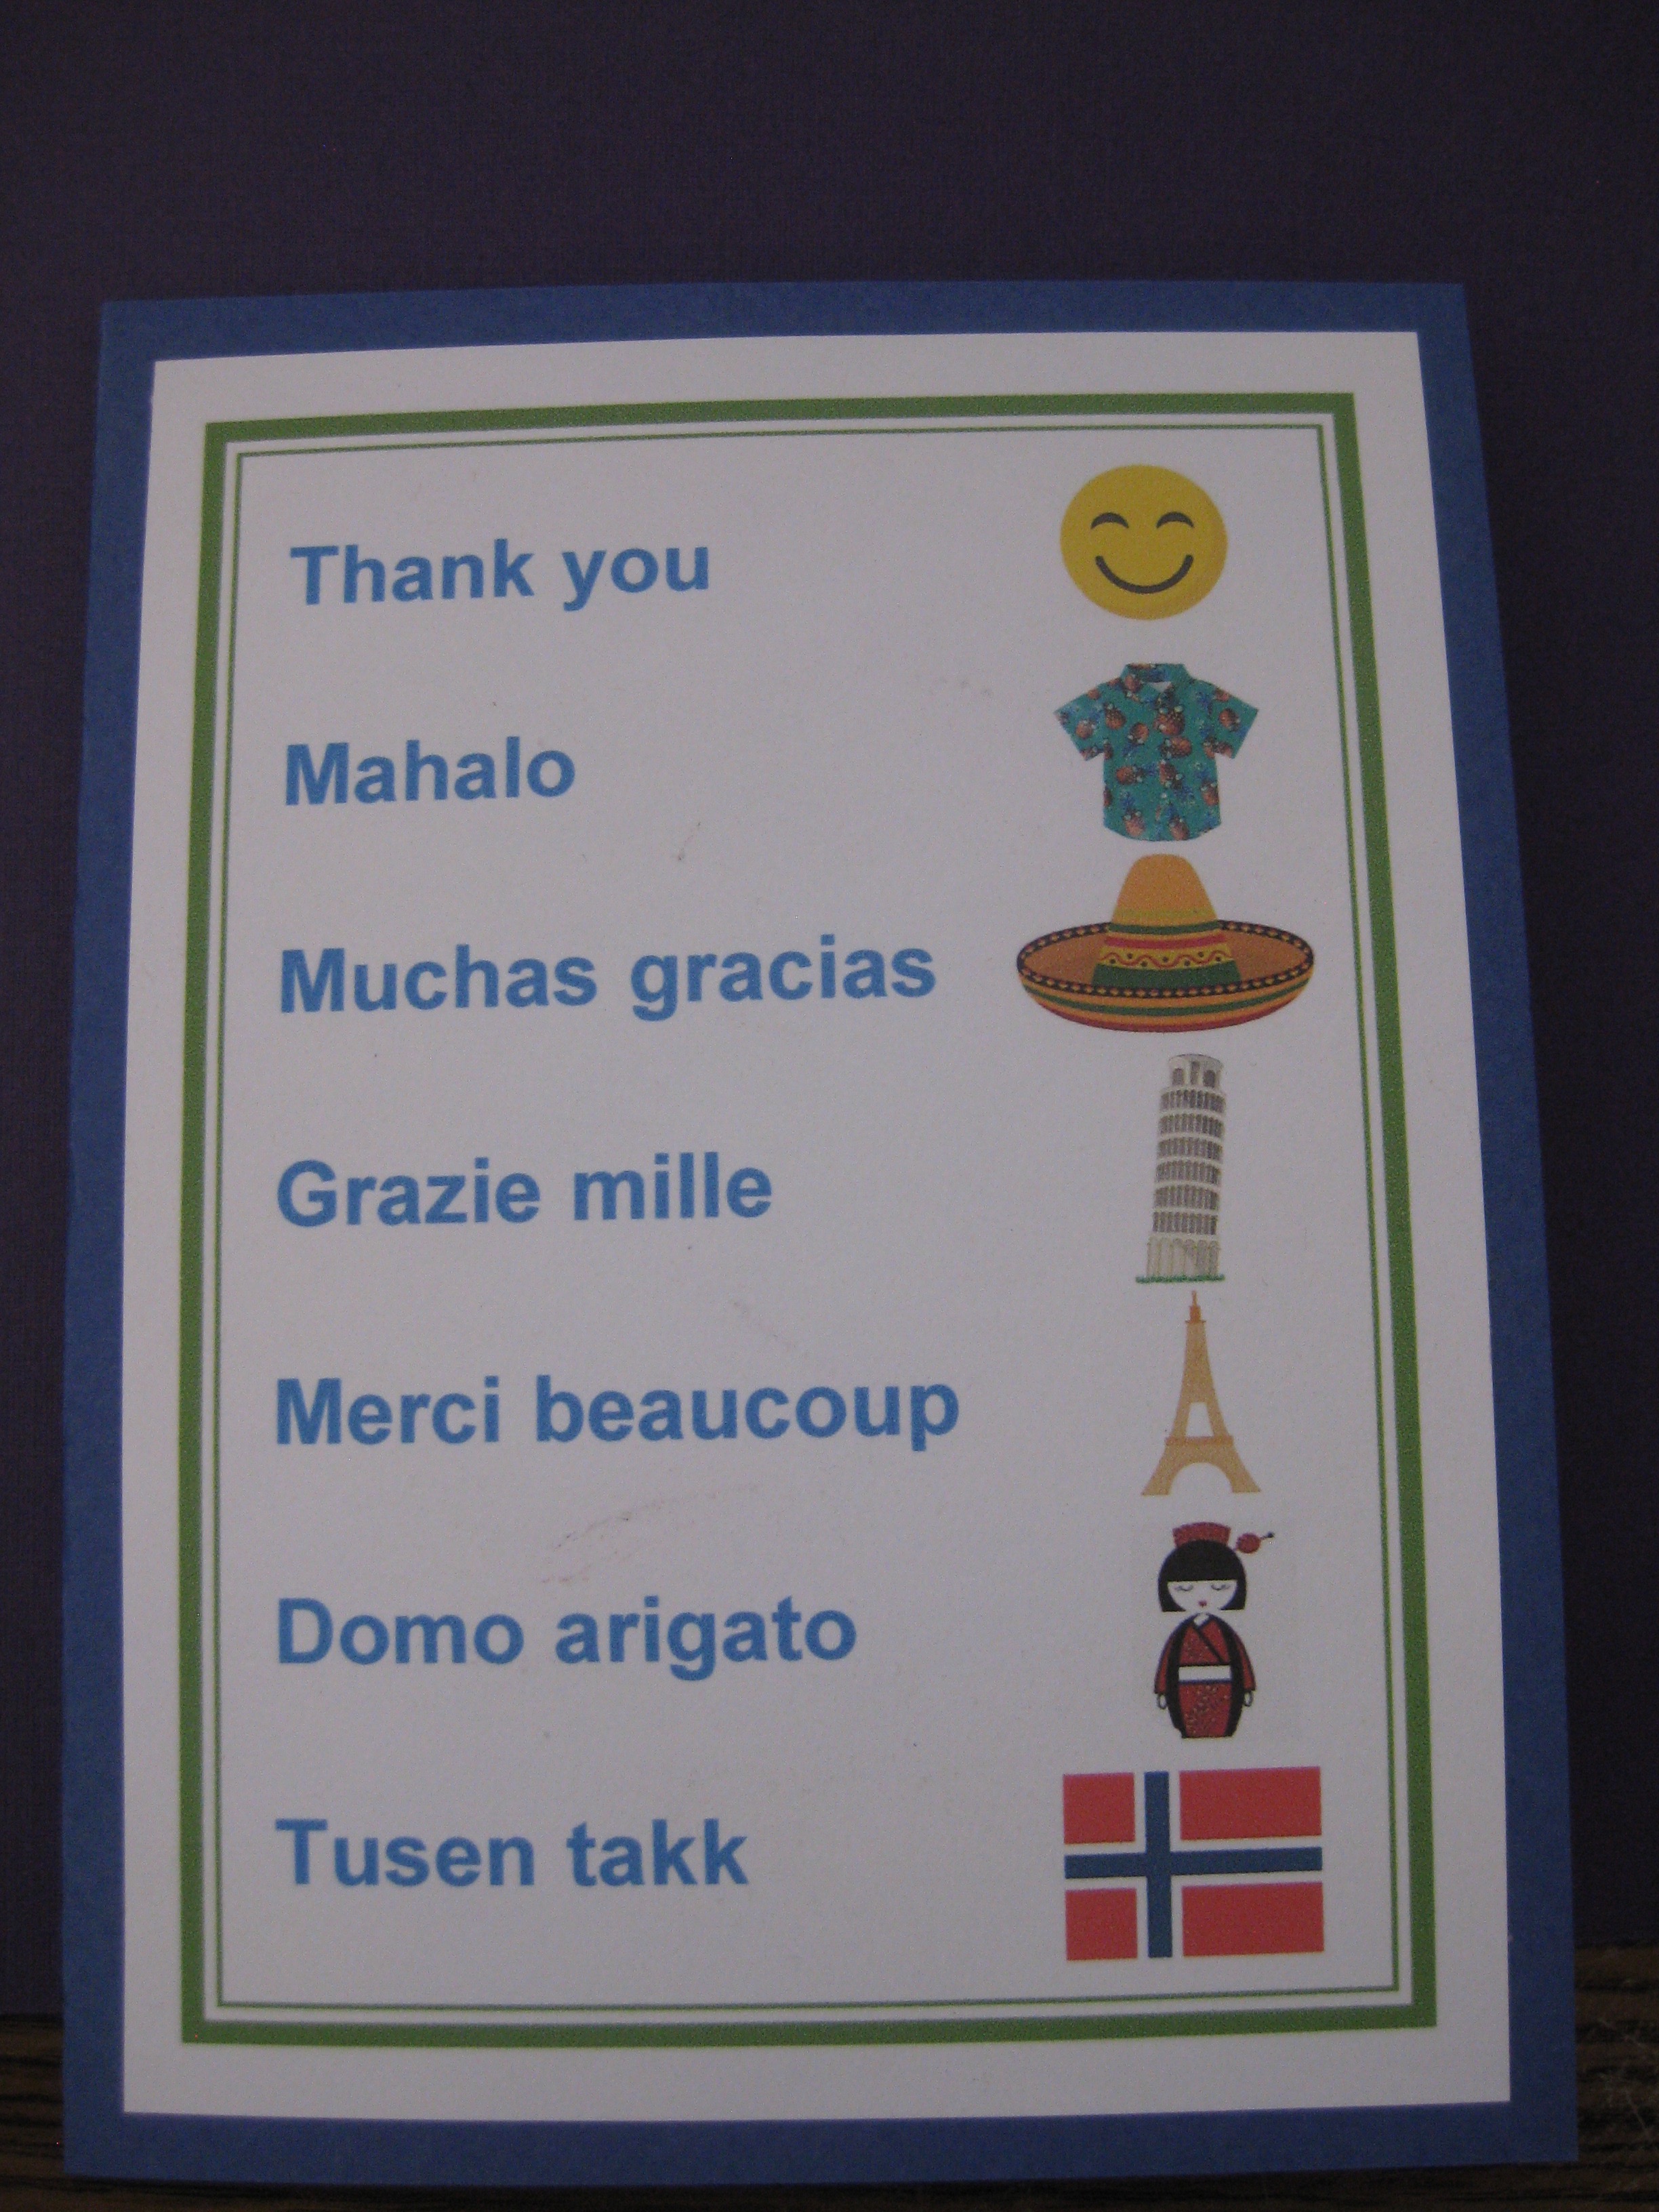 Thank you/languages